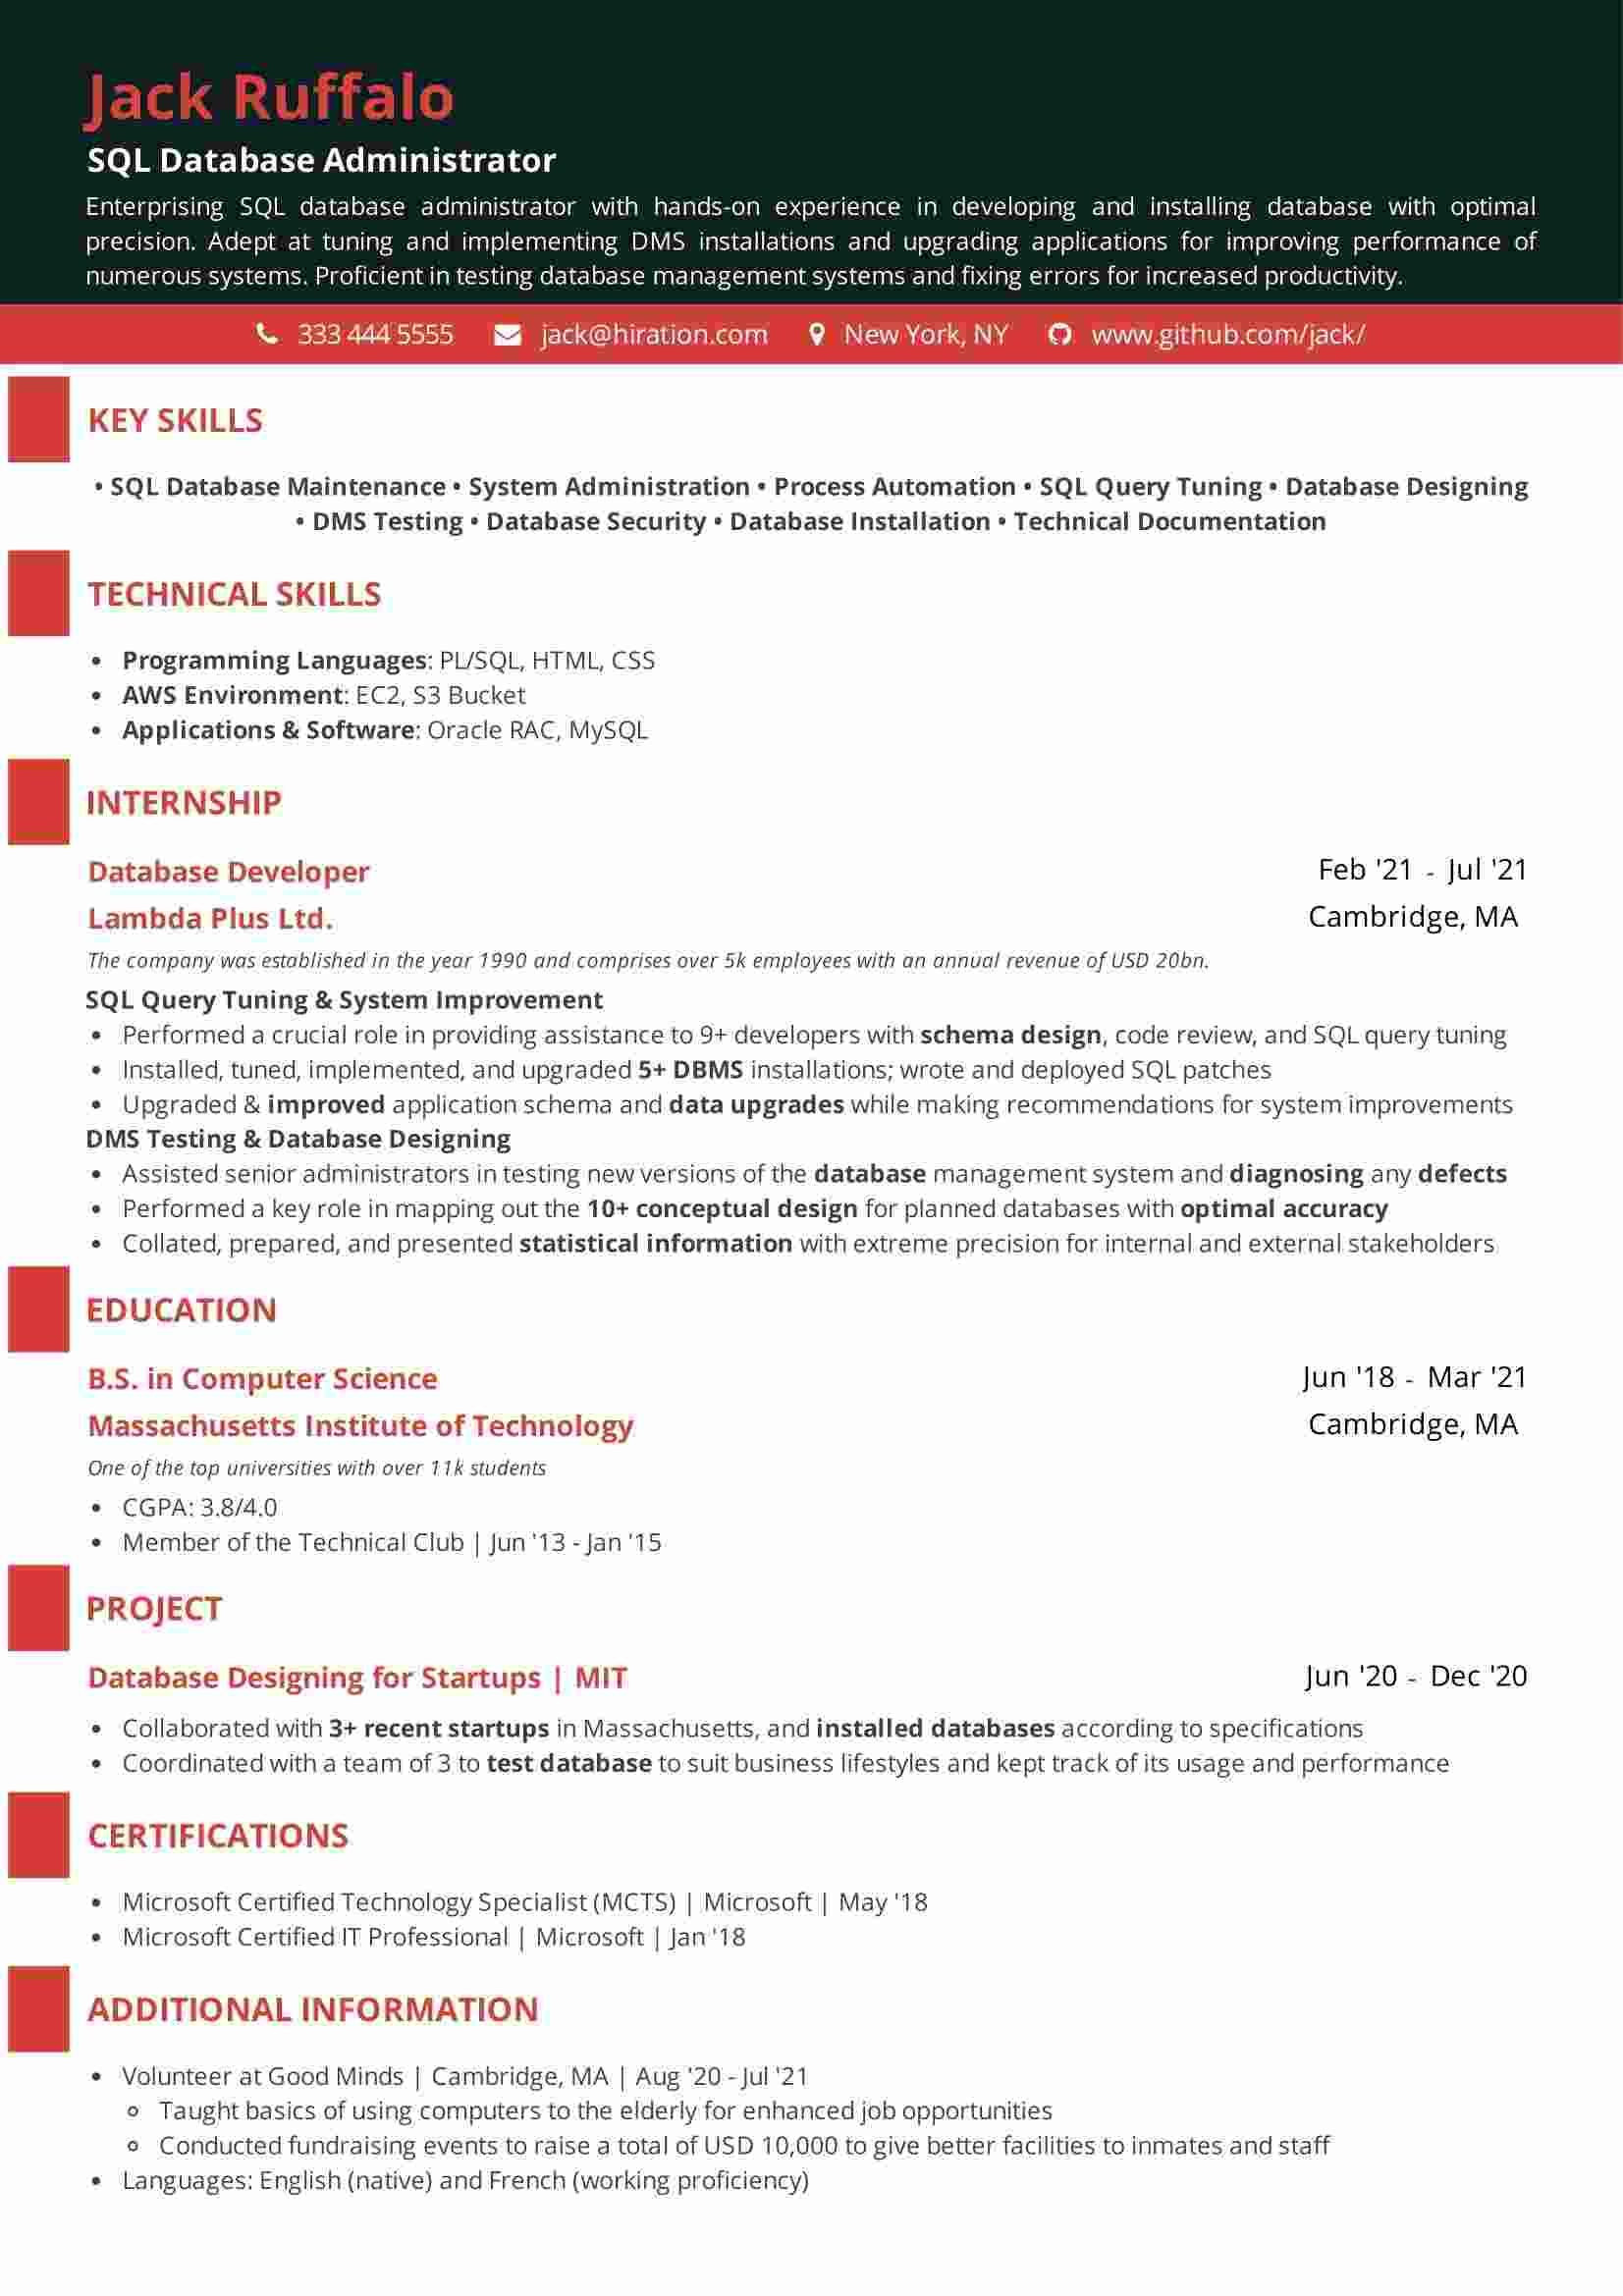 Sample Resume 5 Years Experience Sql Server Sql Dba Resume: 2022 Guide with 10lancarrezekiq Samples and Examples